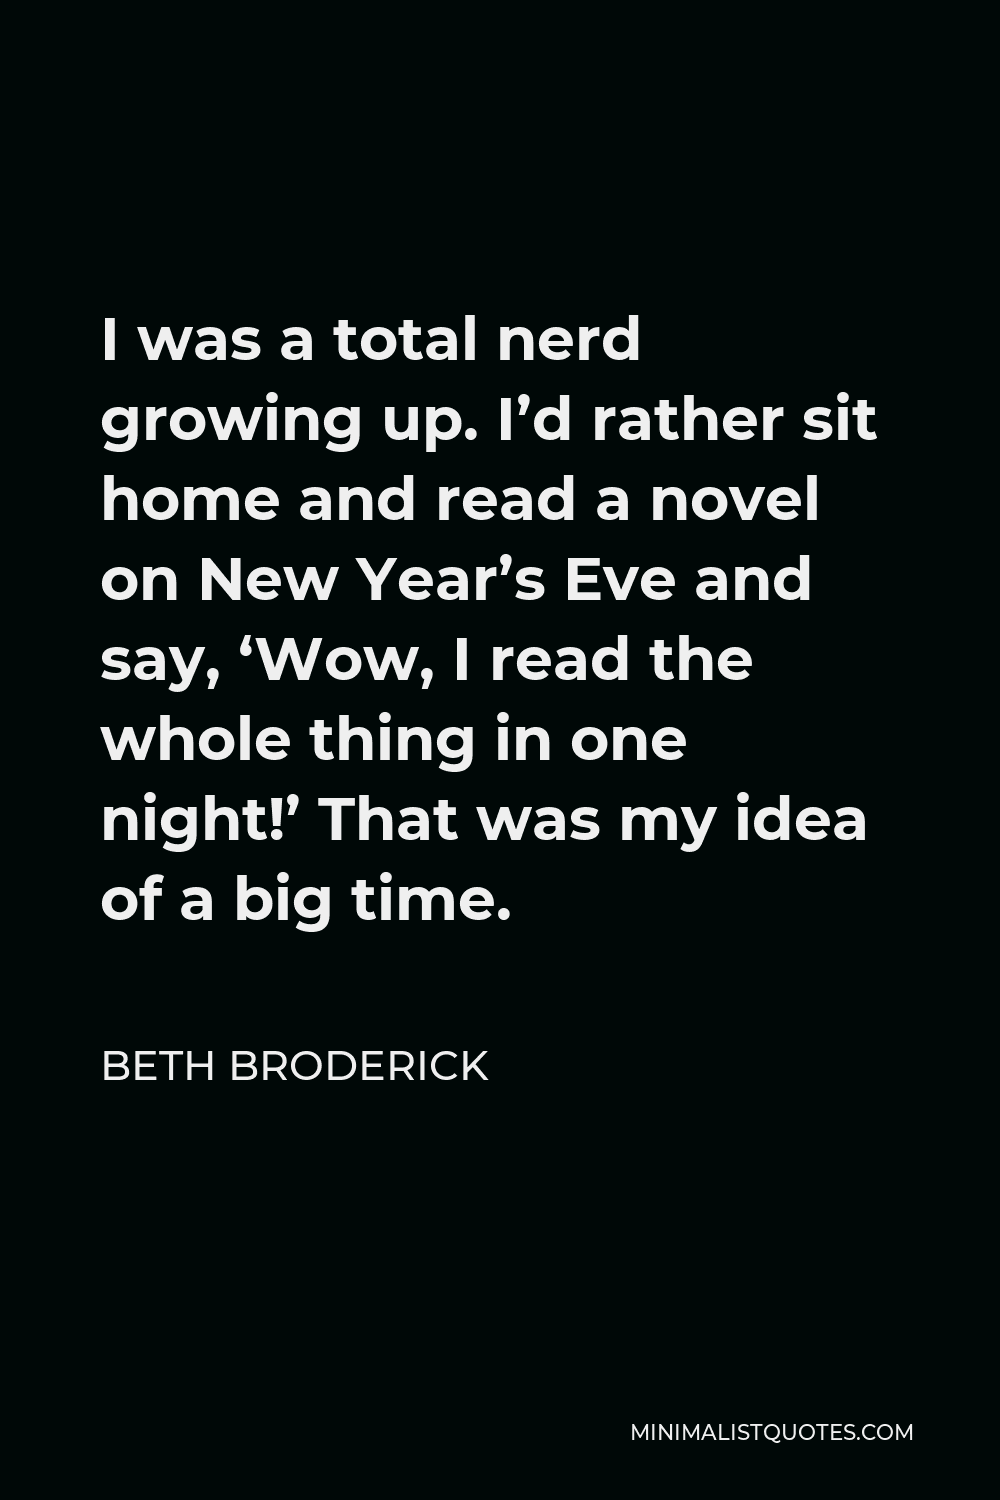 Beth Broderick Quote - I was a total nerd growing up. I’d rather sit home and read a novel on New Year’s Eve and say, ‘Wow, I read the whole thing in one night!’ That was my idea of a big time.